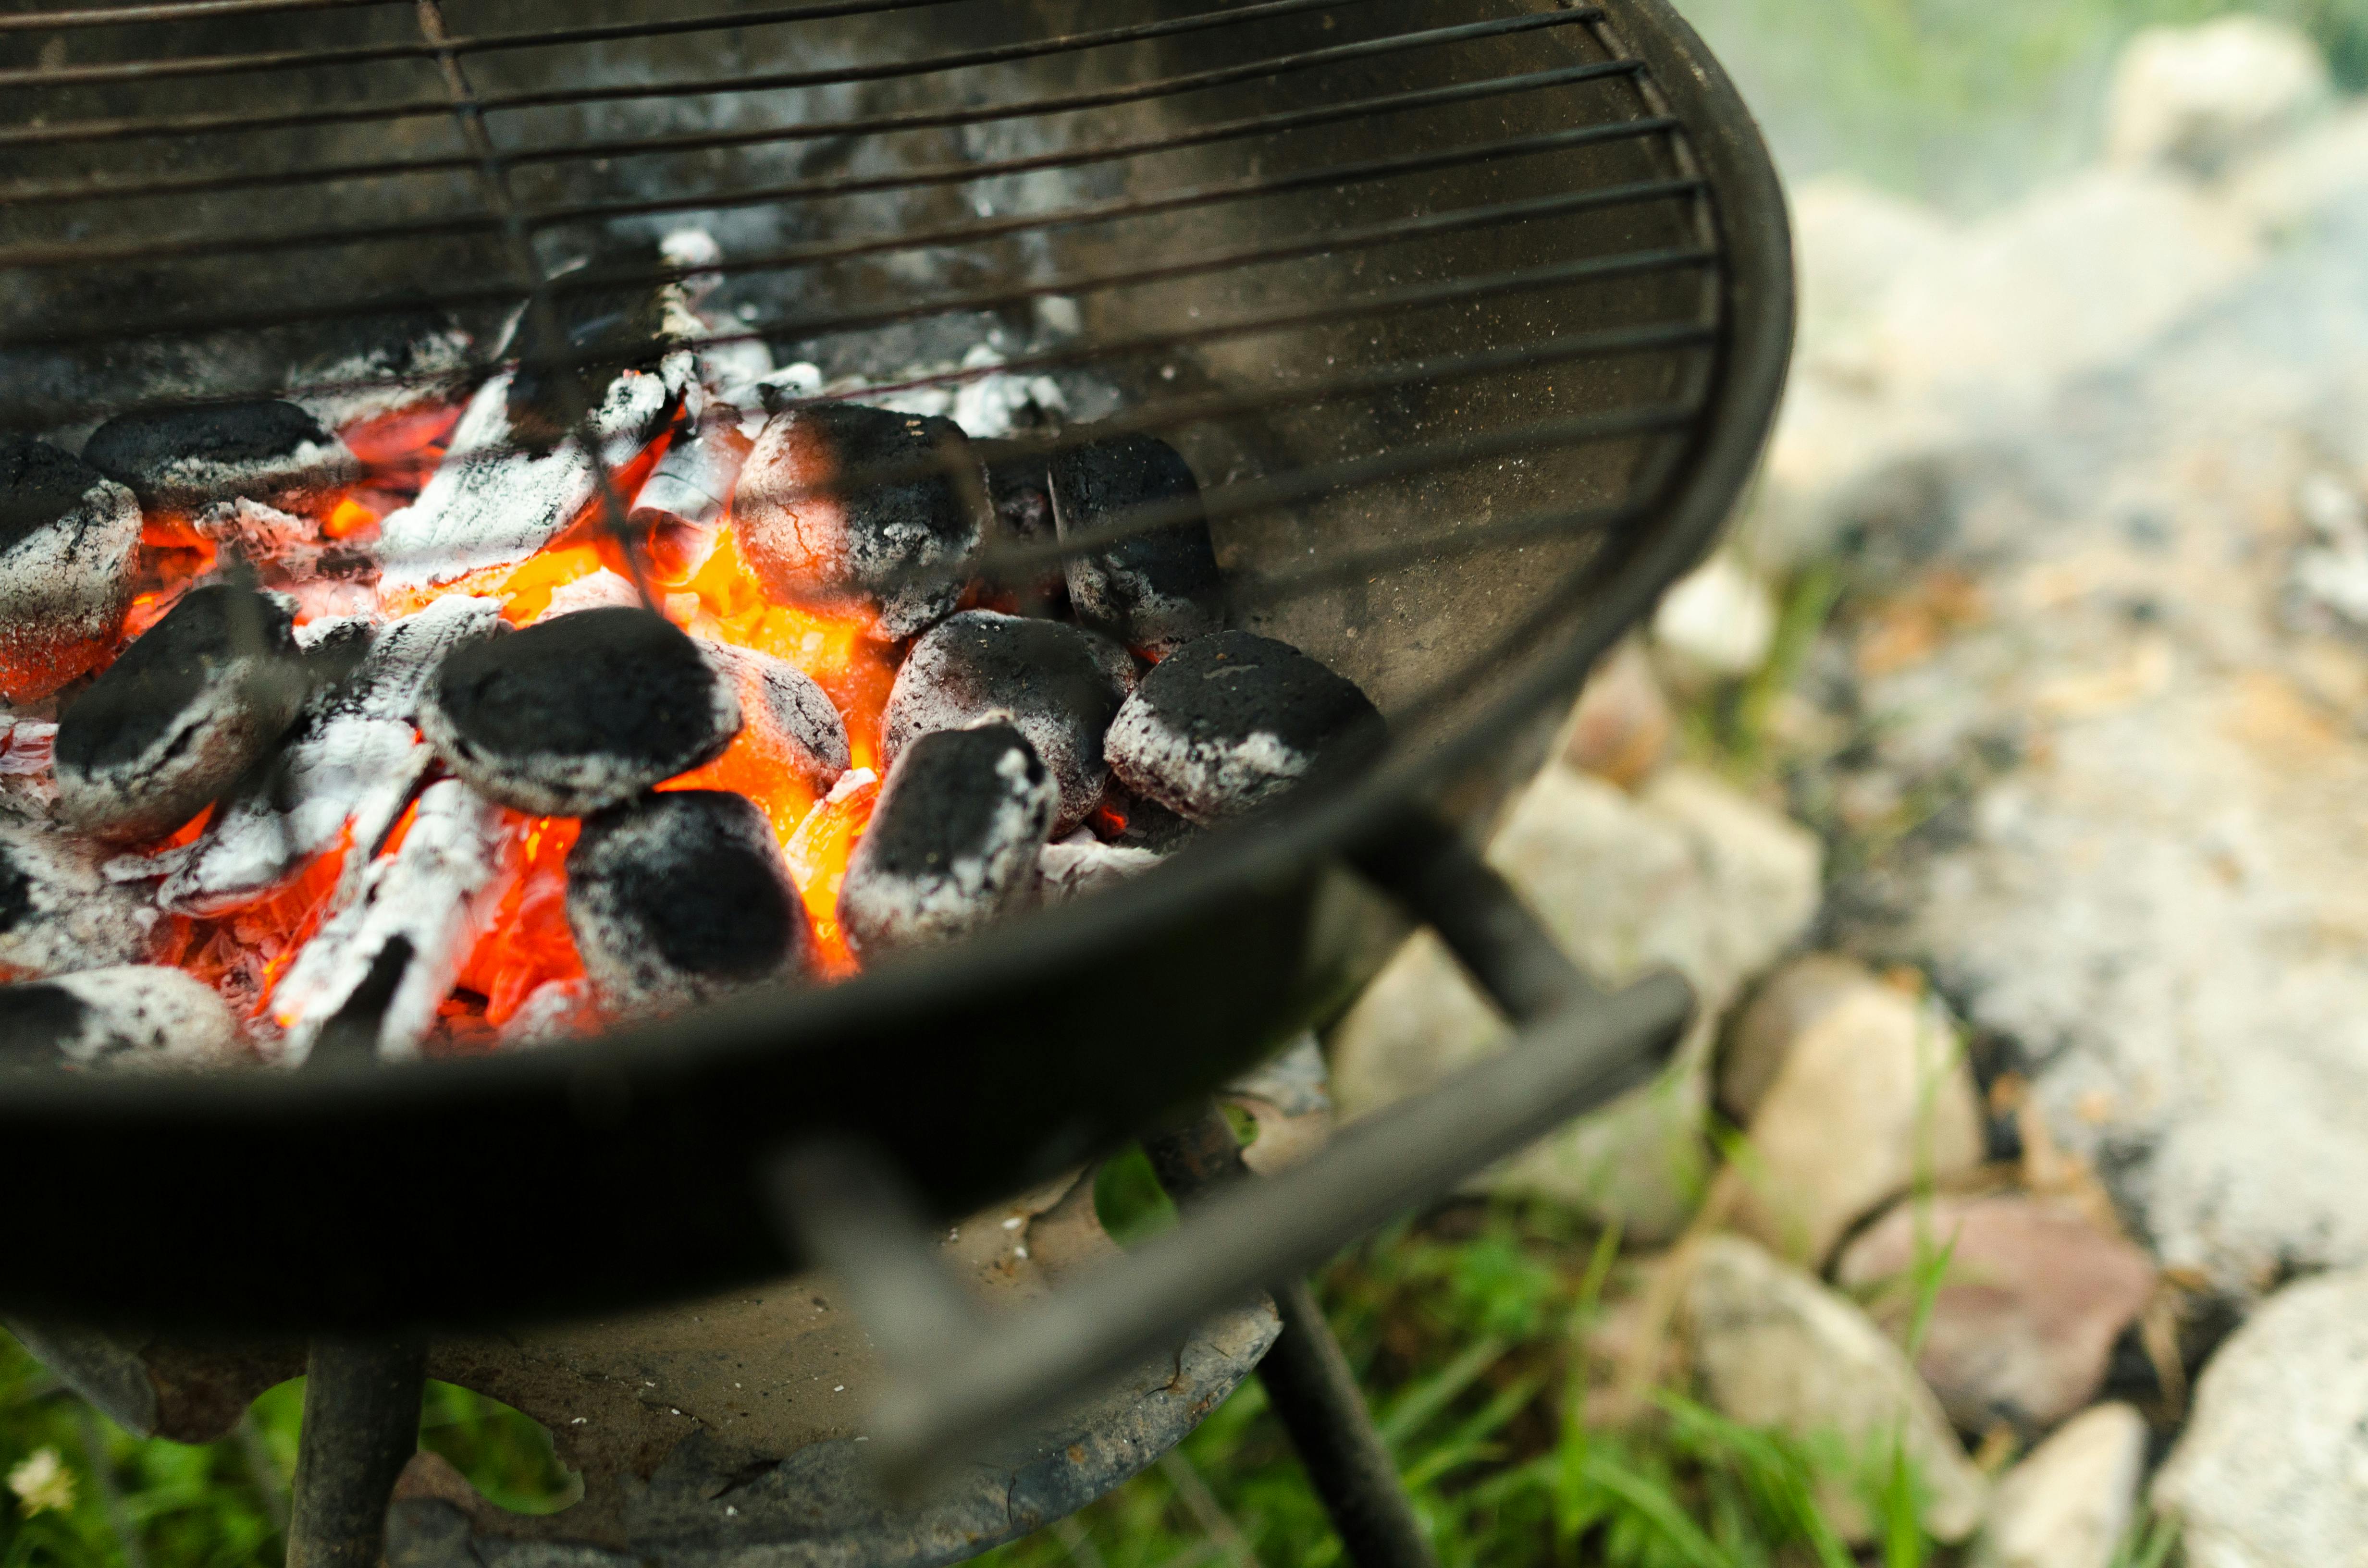 Are There Any Cookware Options Specifically Designed For Outdoor Grilling?